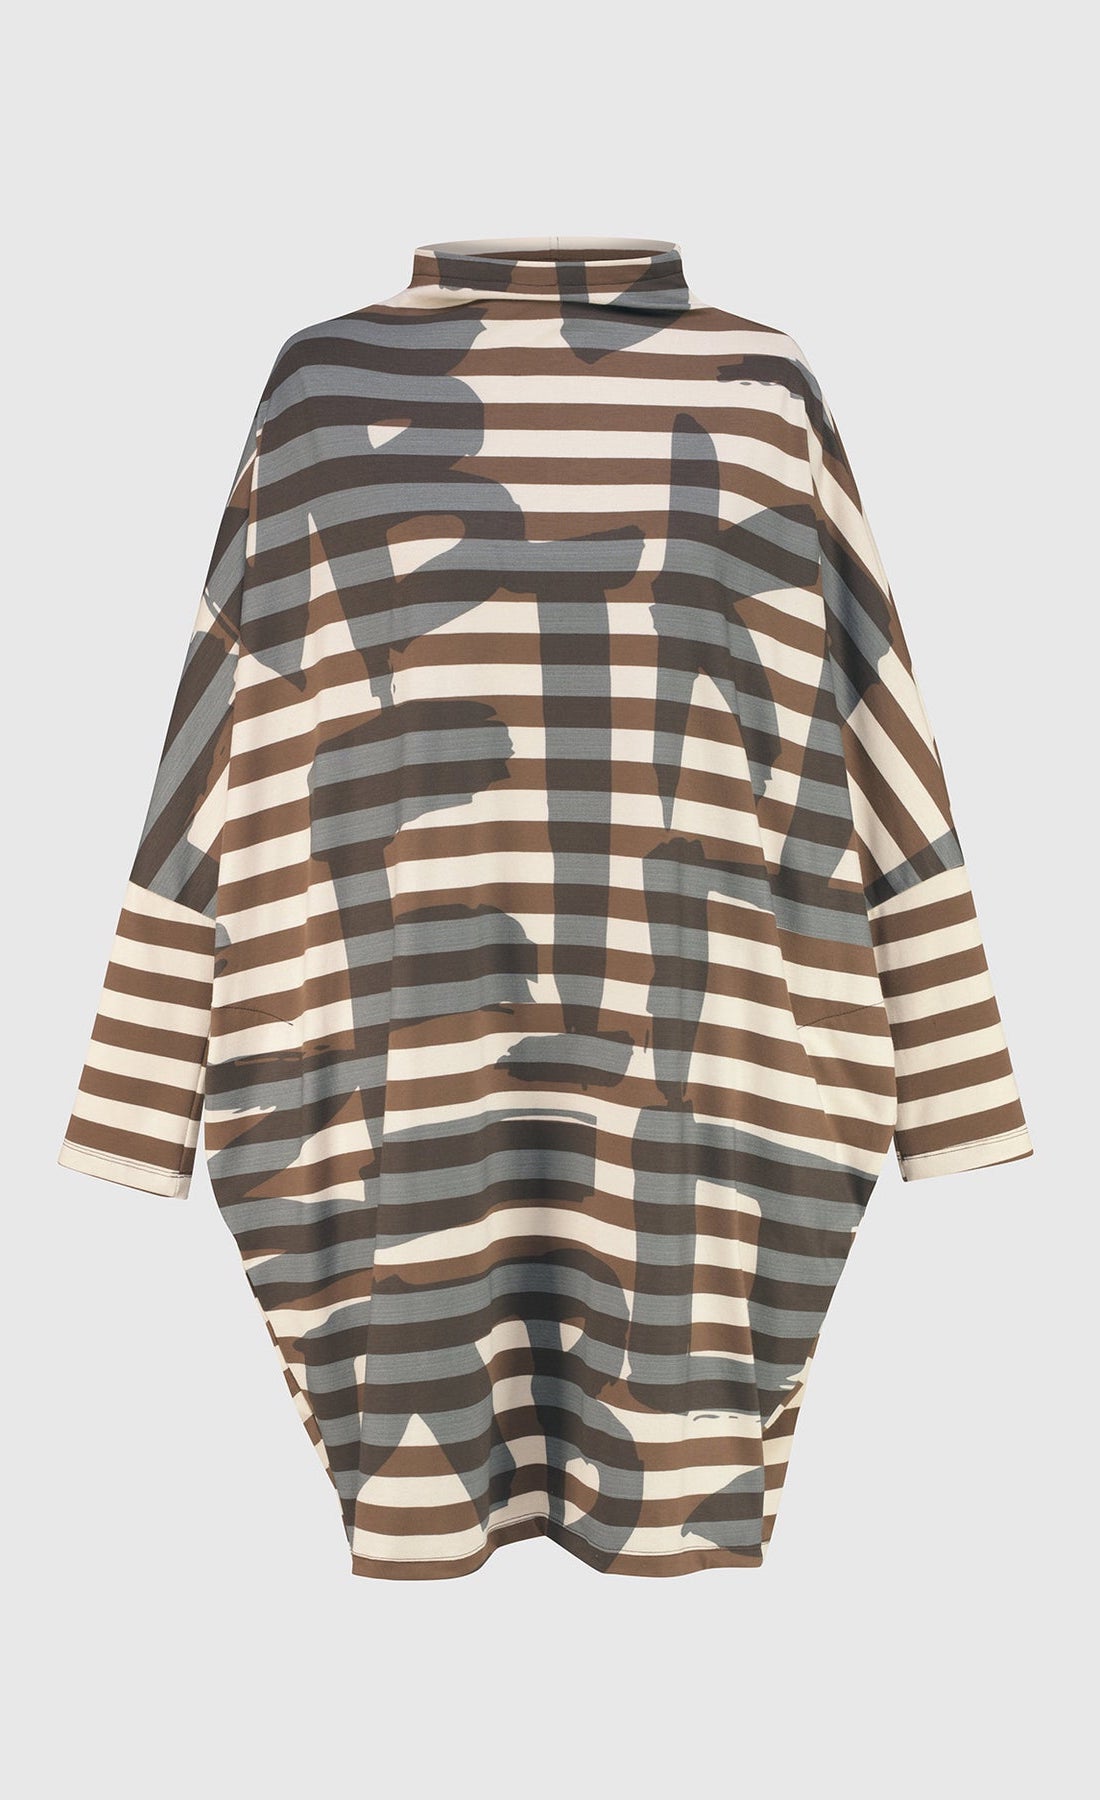 Front of the Alembika Urban Clustur Cocoon Dress. This dress is cream and brown striped with a gray graffiti print all over it. The dress has a cocoon shape that tapers in at the knees. It has drop shoulder, long dolman sleeves and a mock neck.